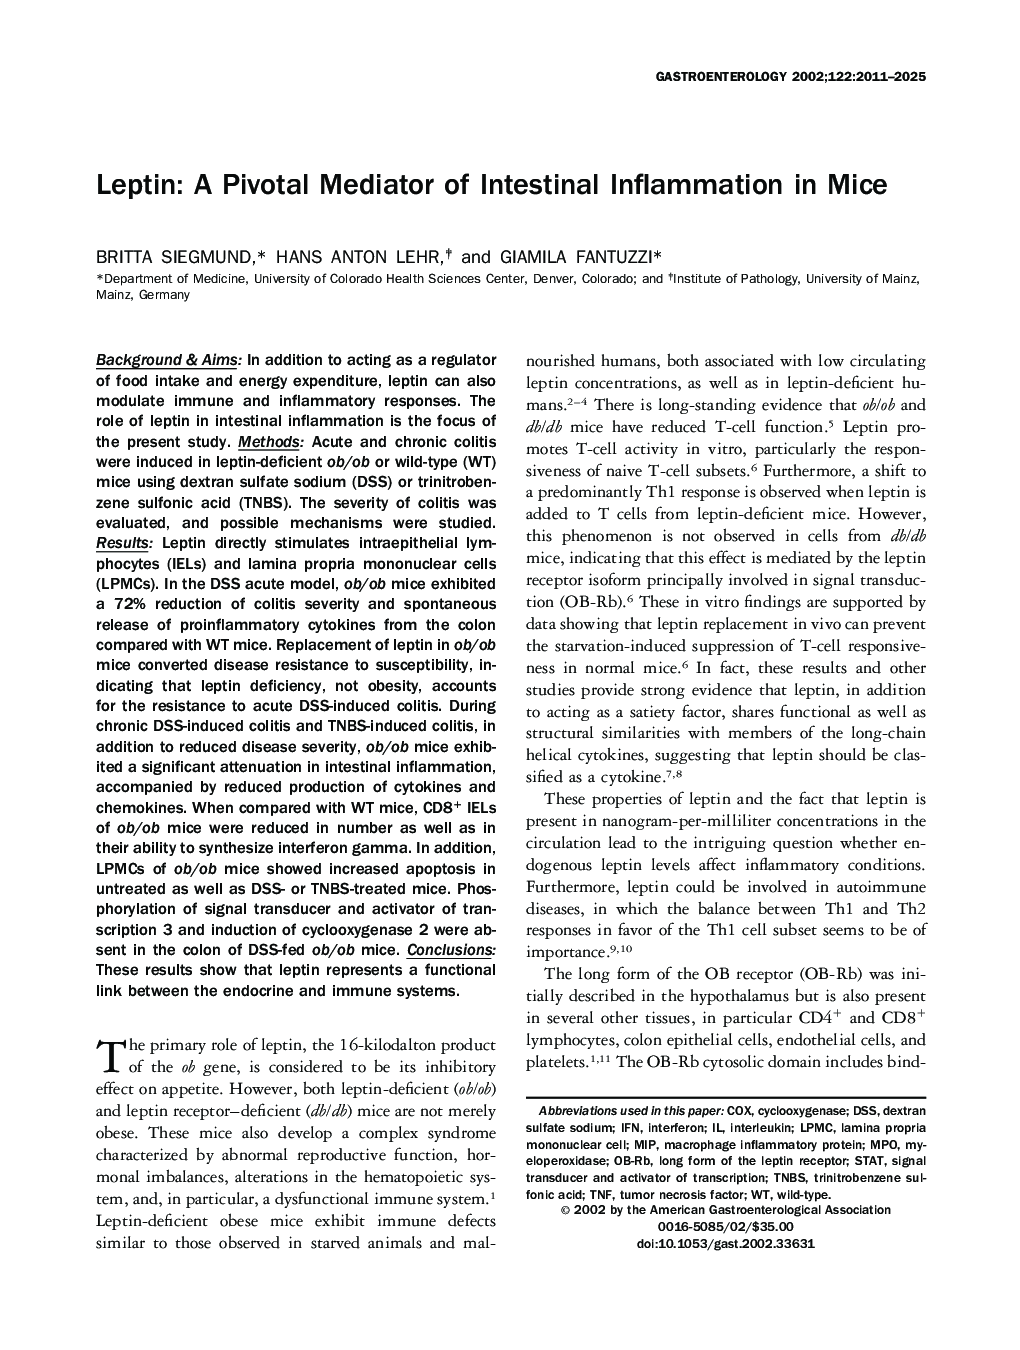 Leptin: A pivotal mediator of intestinal inflammation in mice 